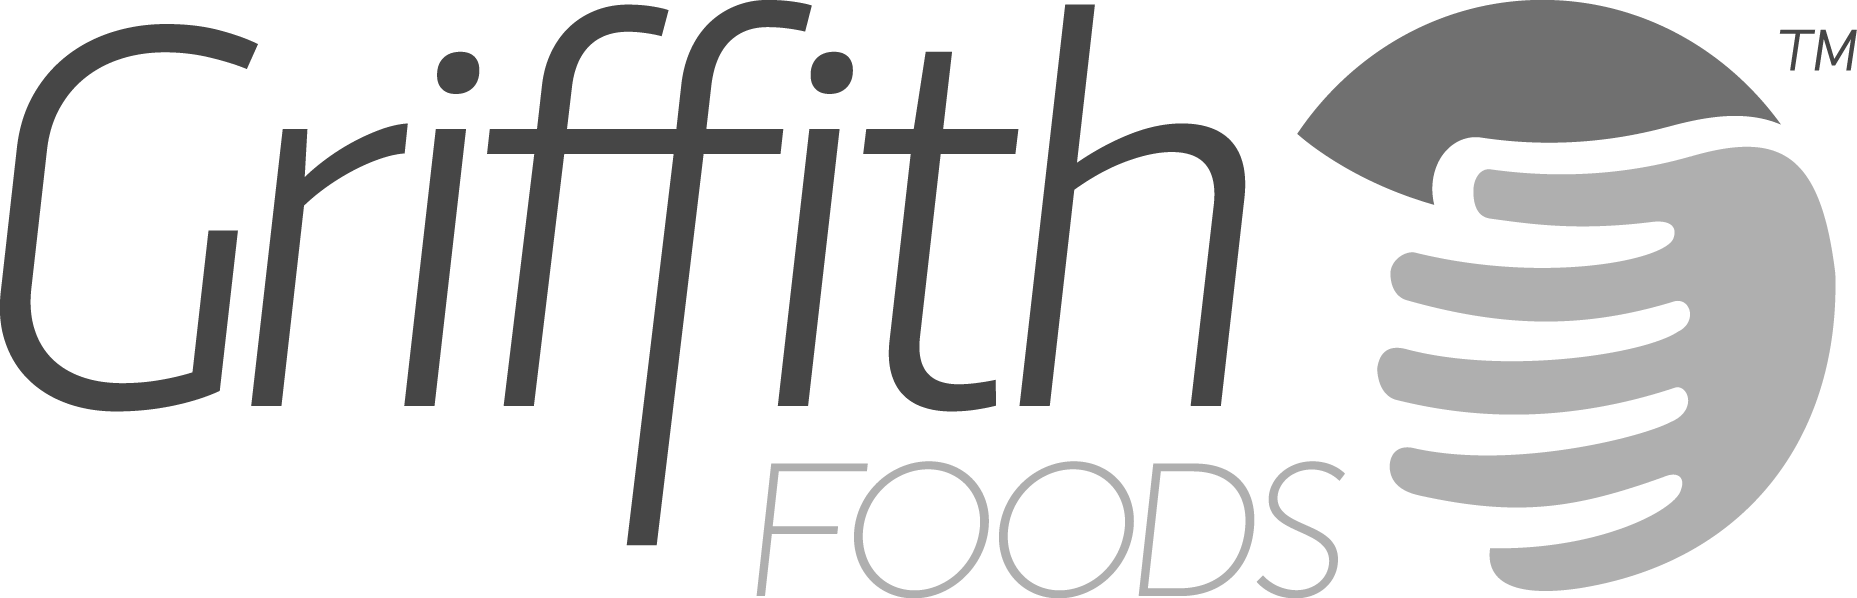 griffith-foods